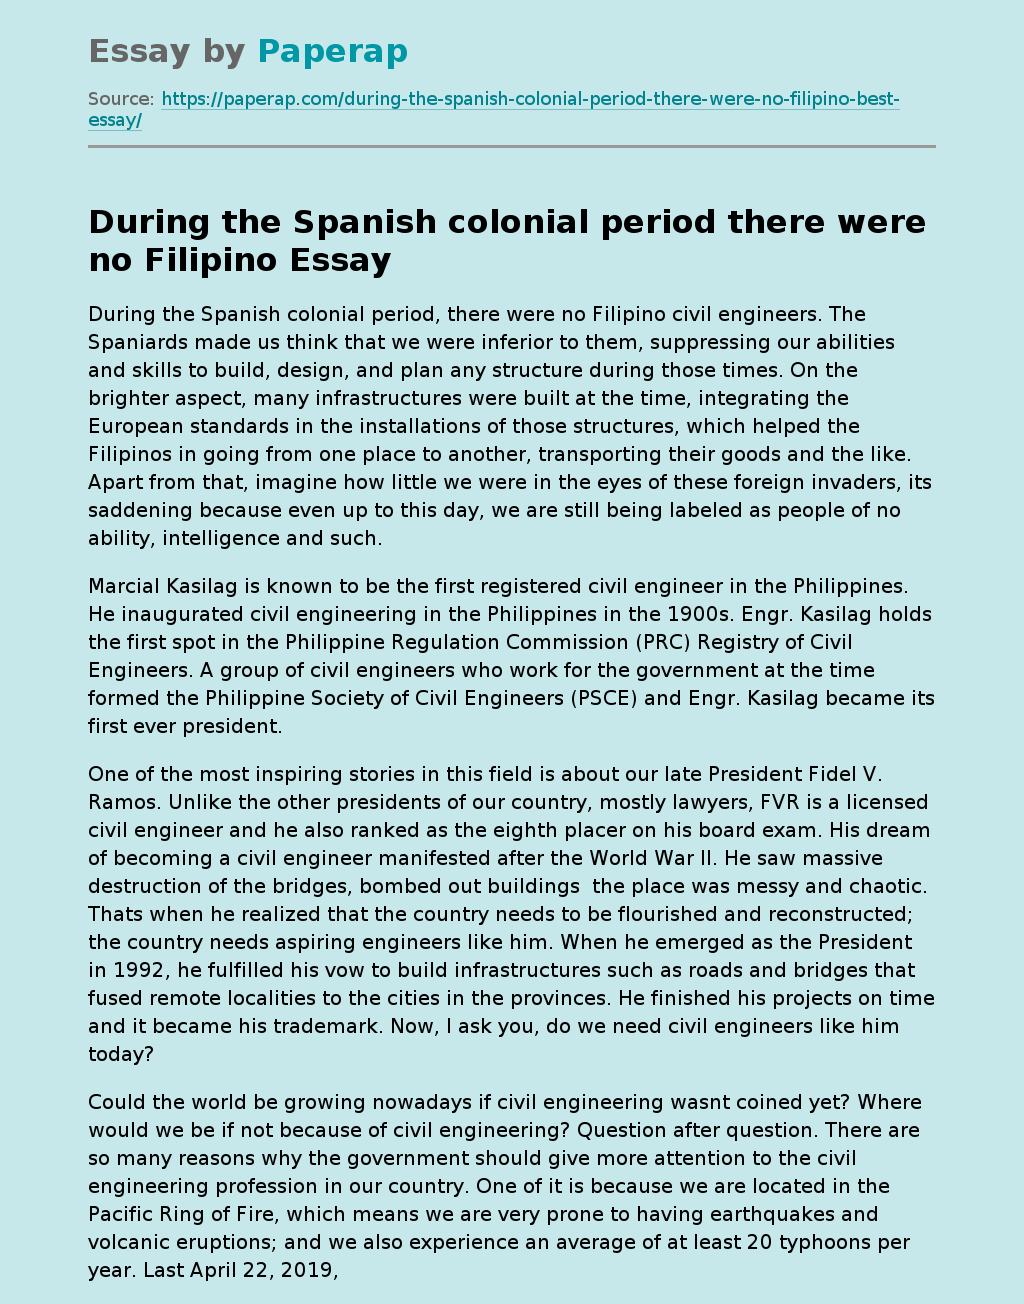 During the Spanish colonial period there were no Filipino